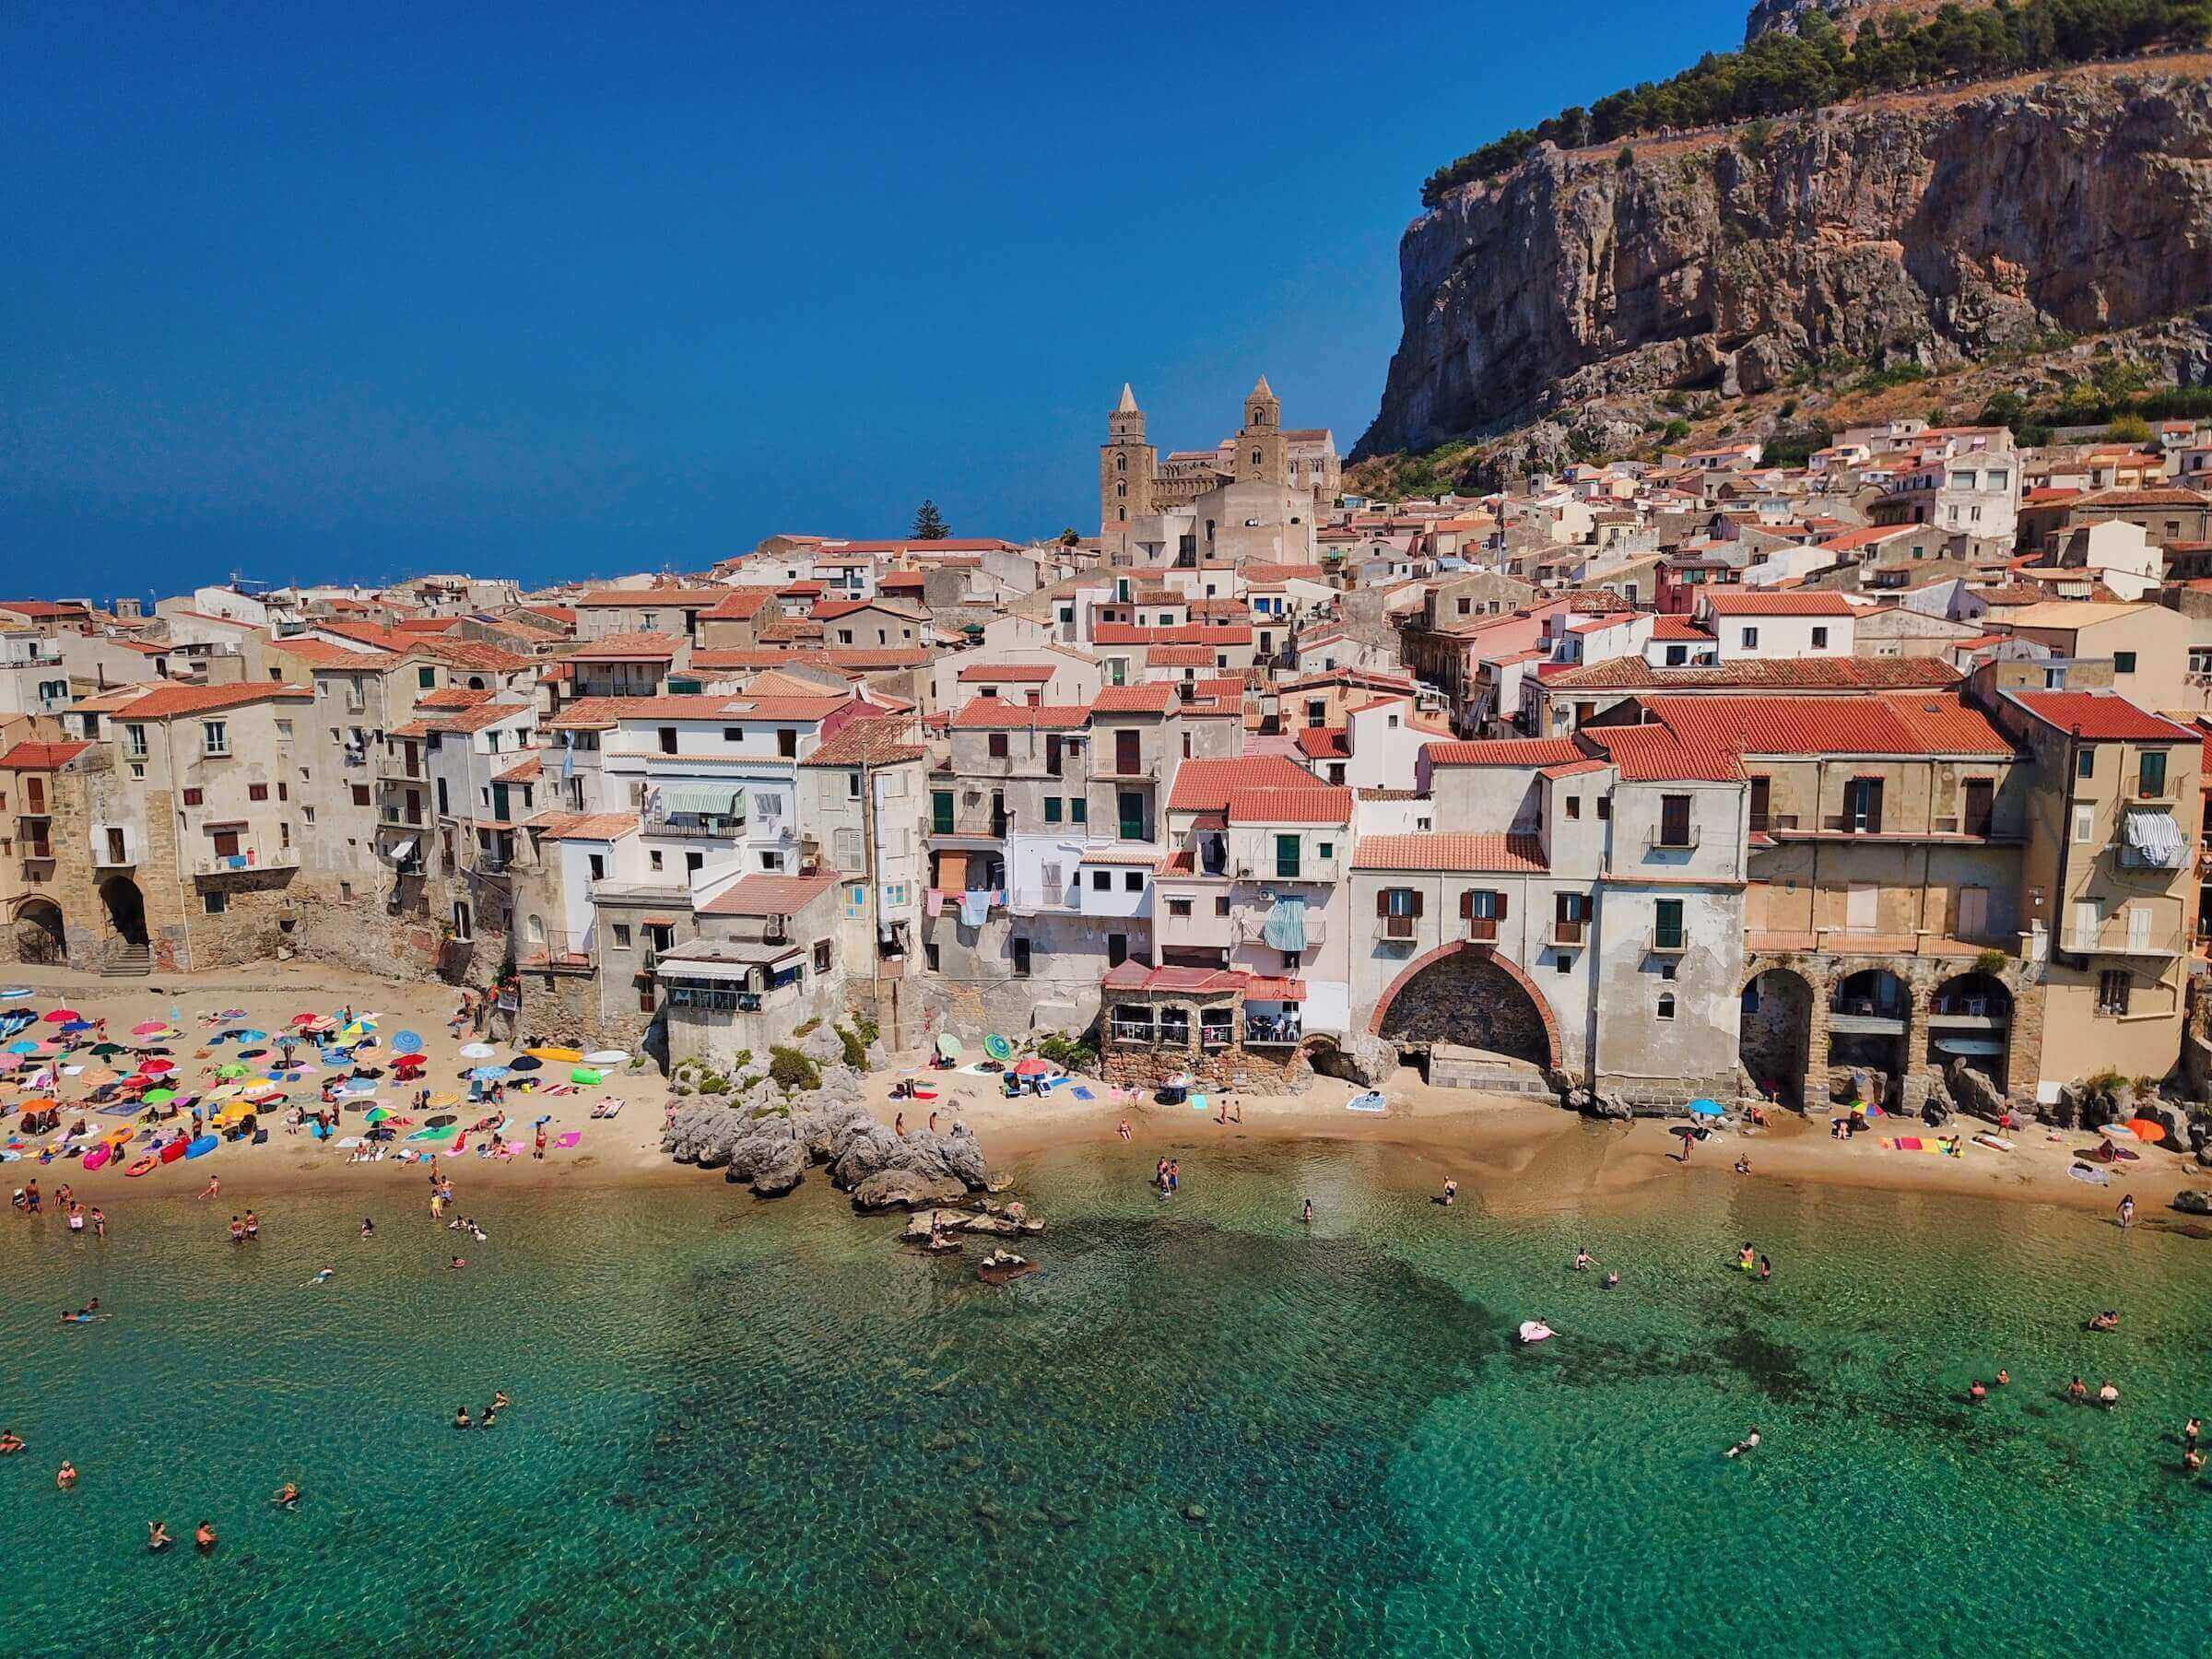 It is worth visiting Cefalù Sicily